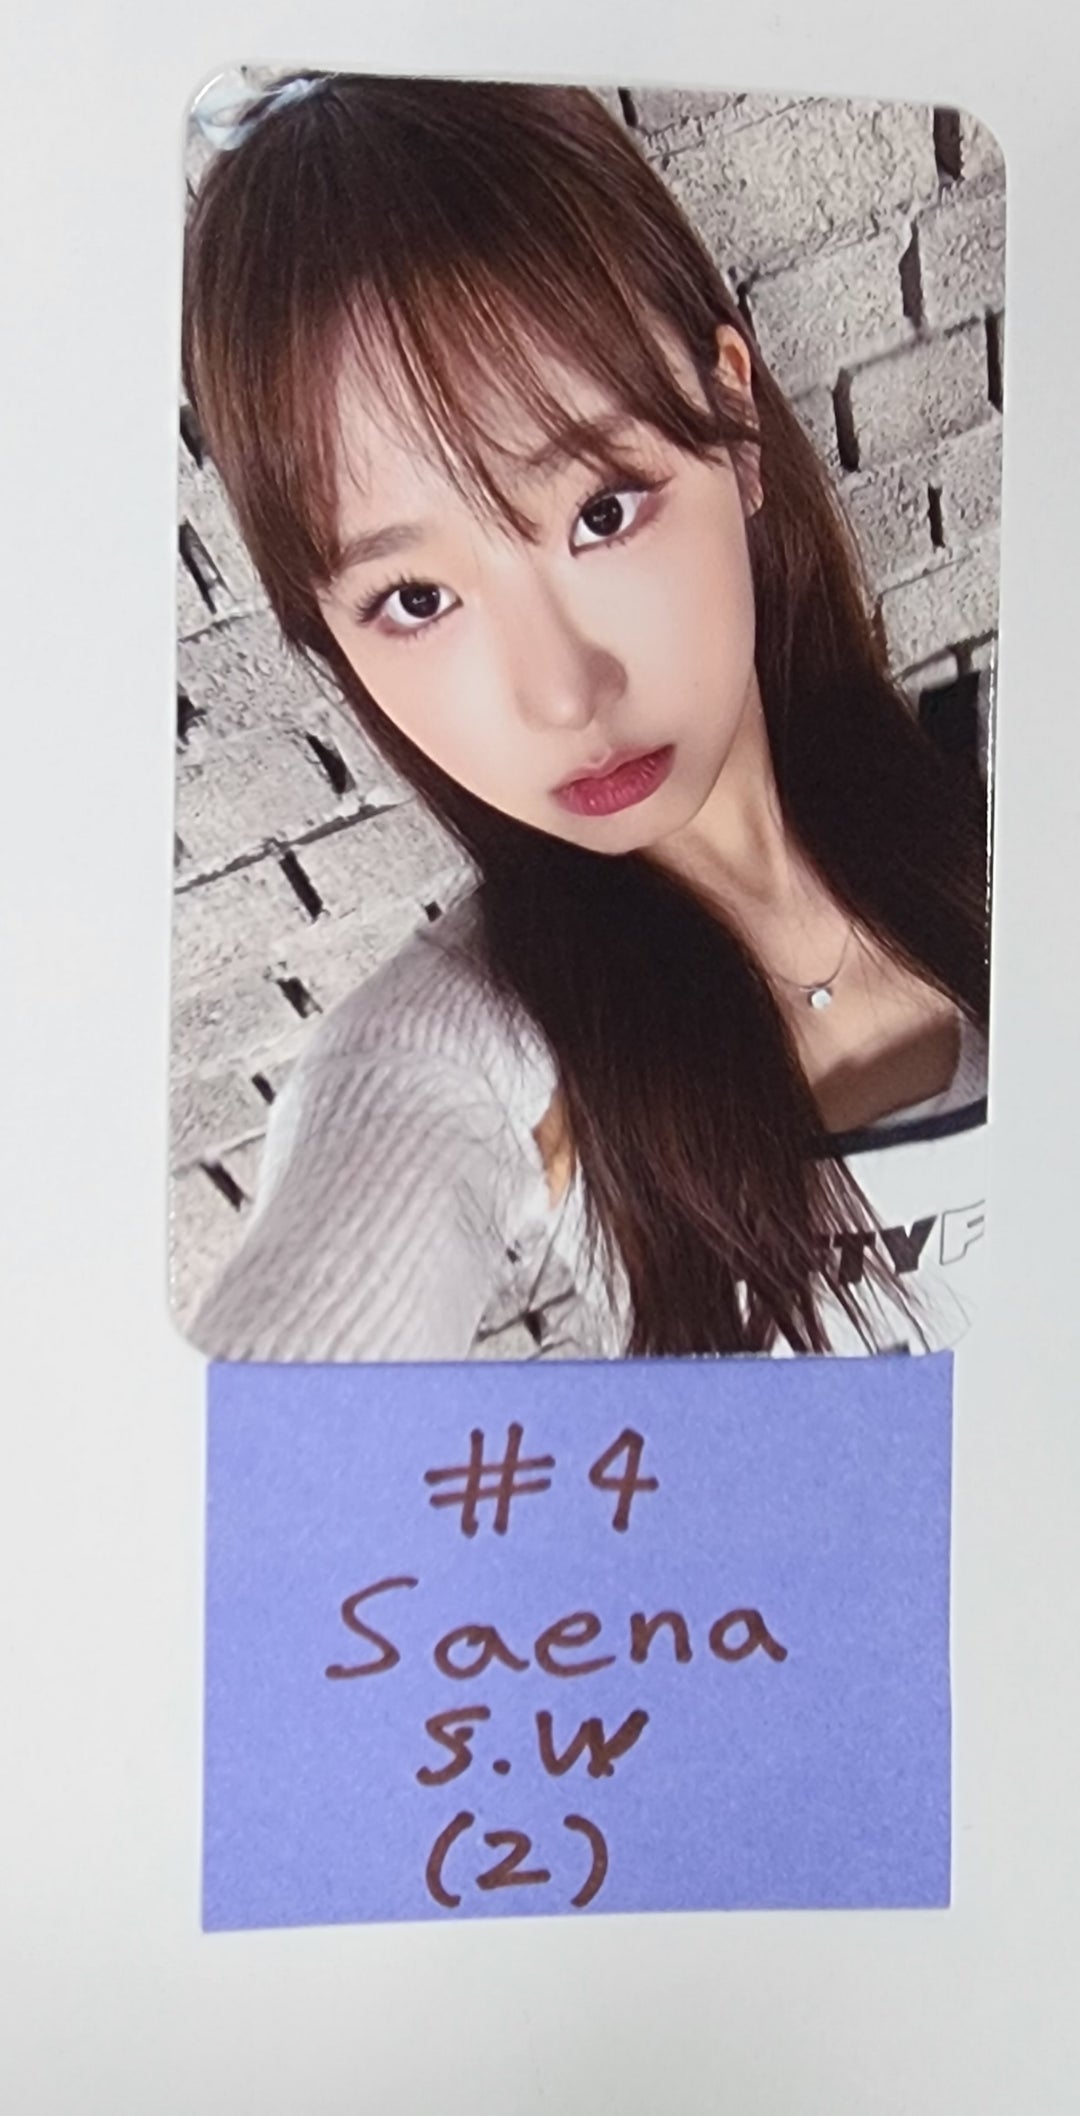 FIFTY FIFTY "The Beginning: Cupid" - Soundwave Fansign Event Photocard Round 2